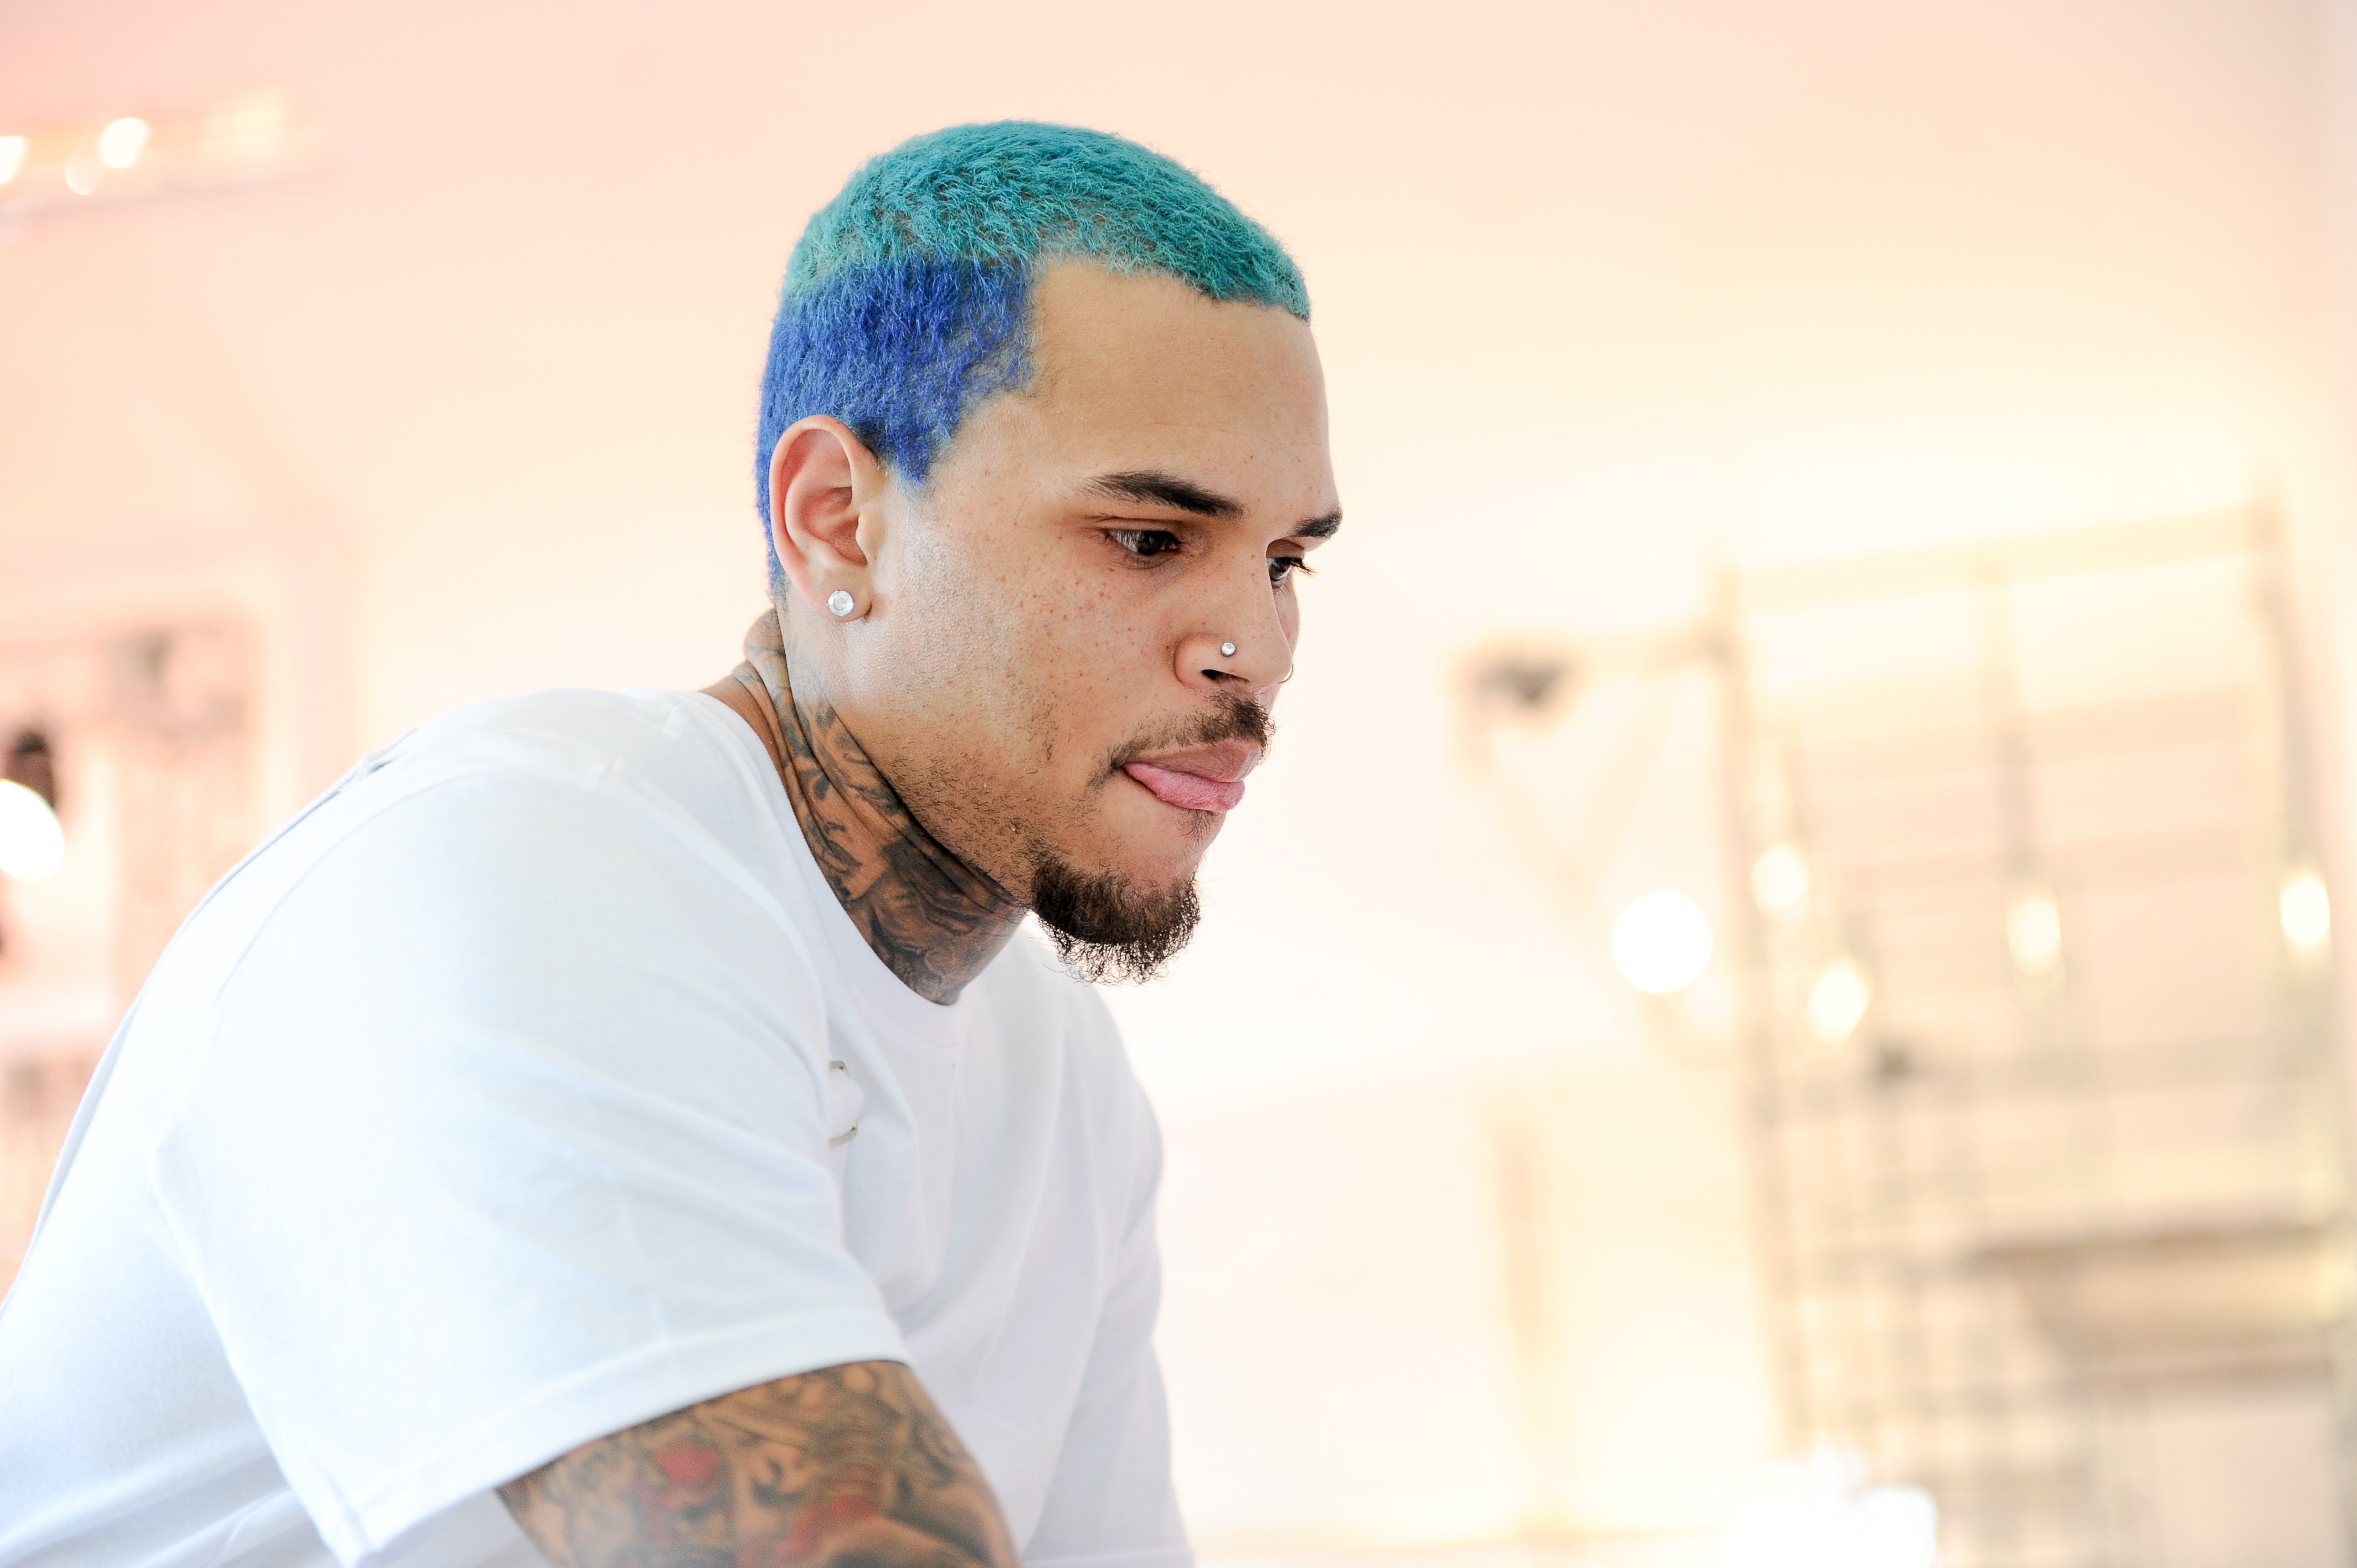 Share more than 70 chris brown new hairstyle - in.eteachers